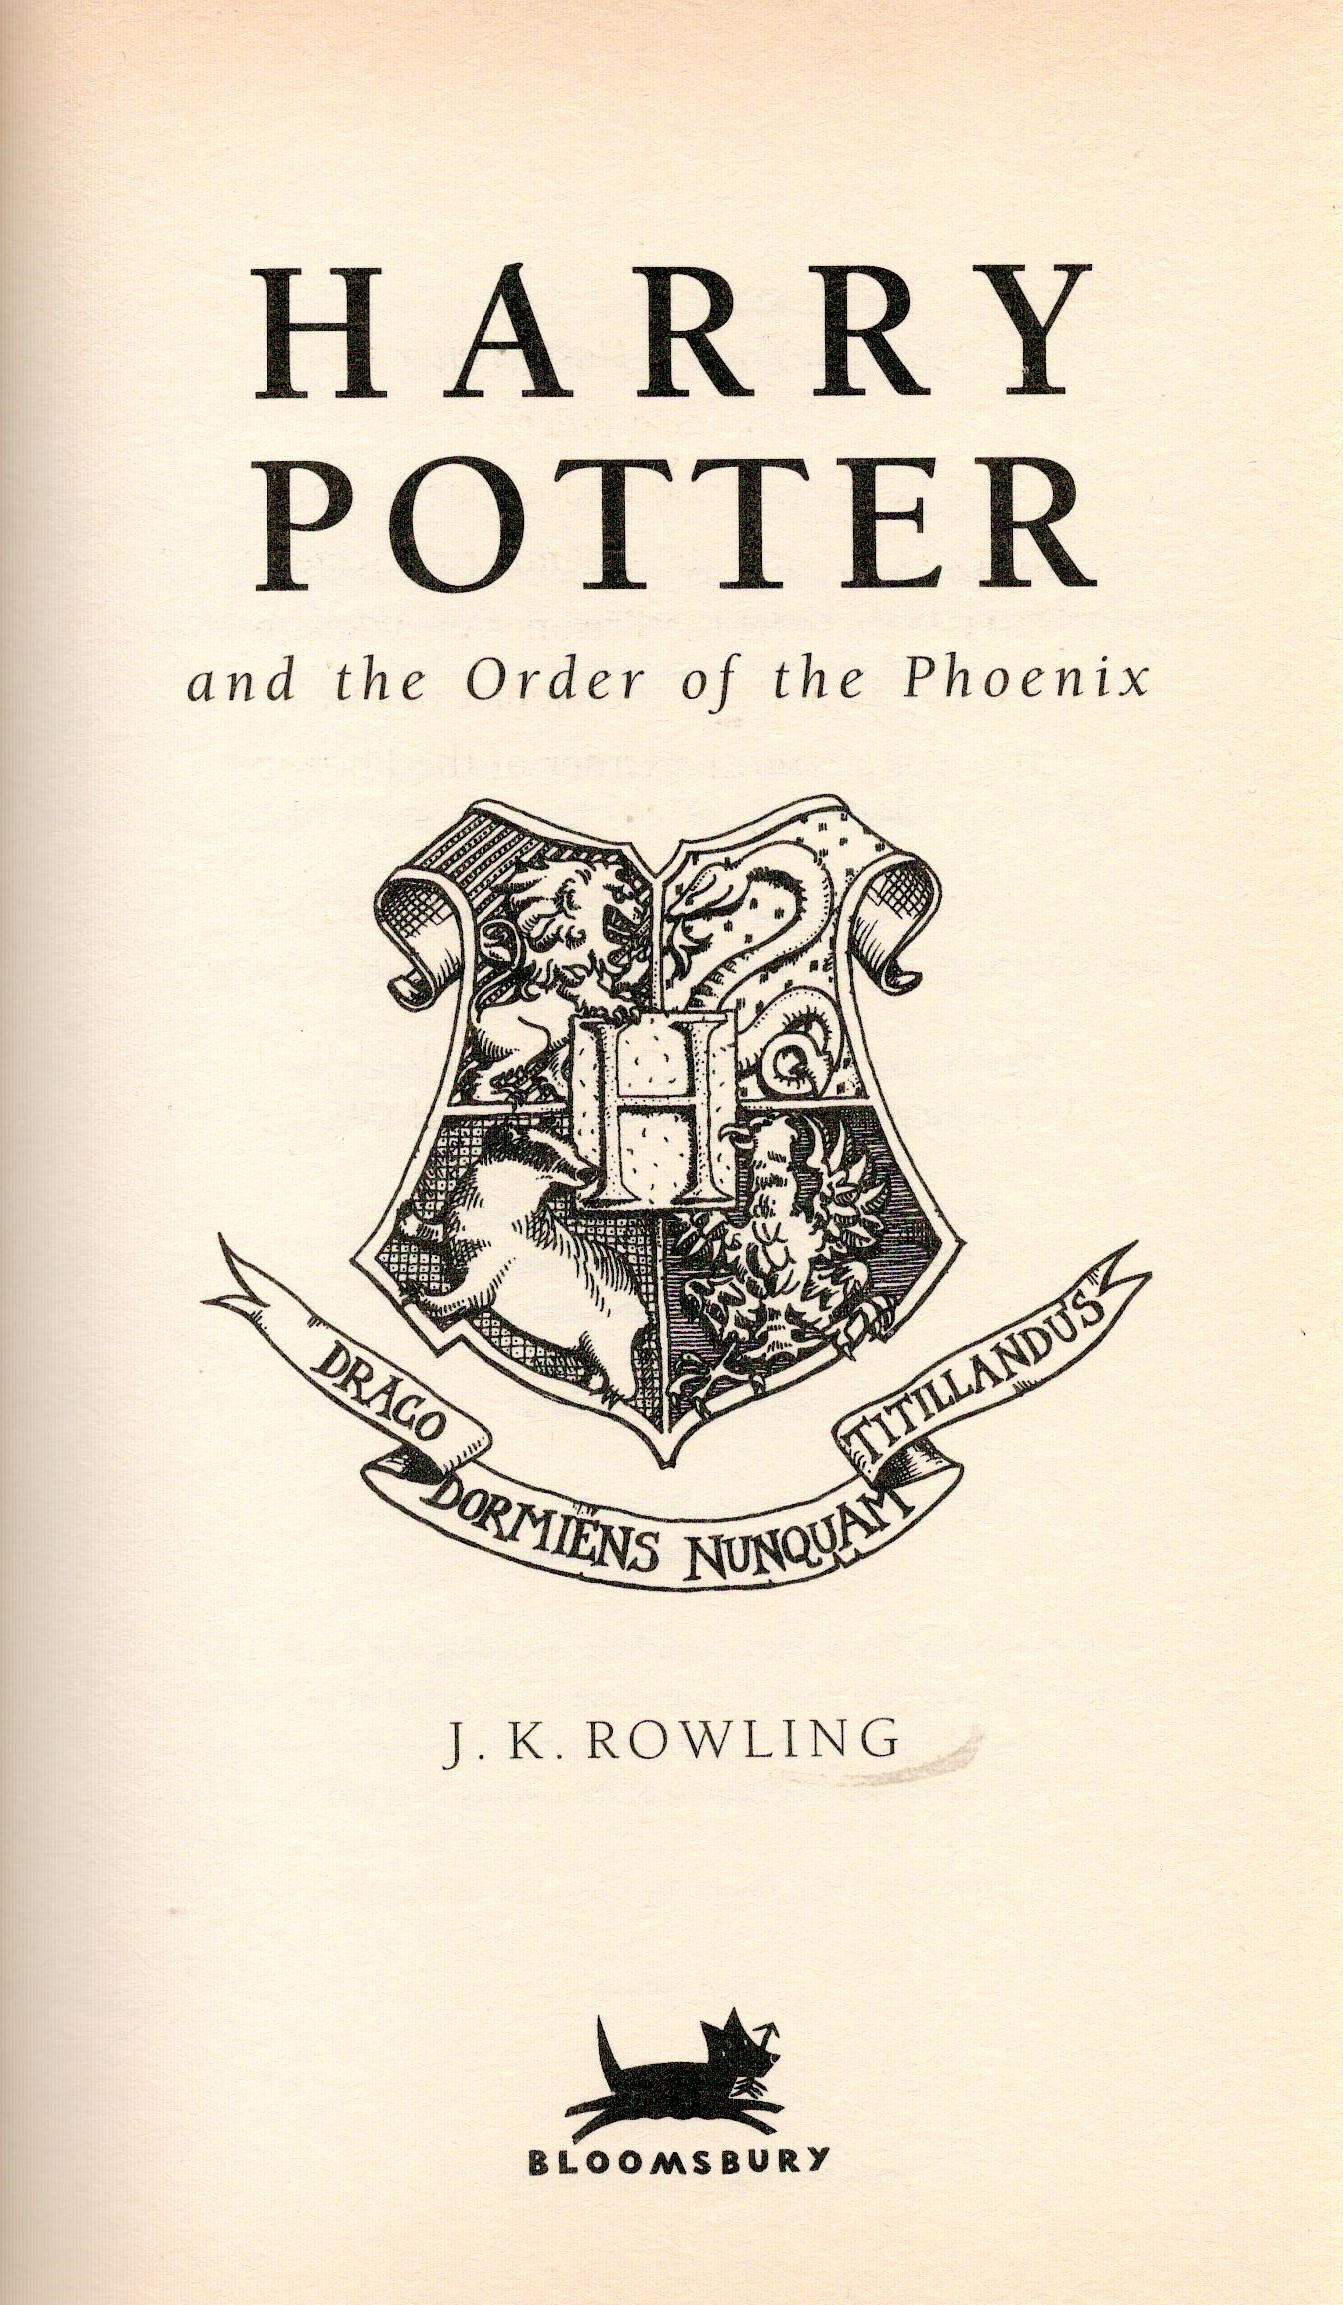 Harry Potter and the Order of The Phoenix by J K Rowling Hardback Book First Edition 2003 - Image 2 of 3